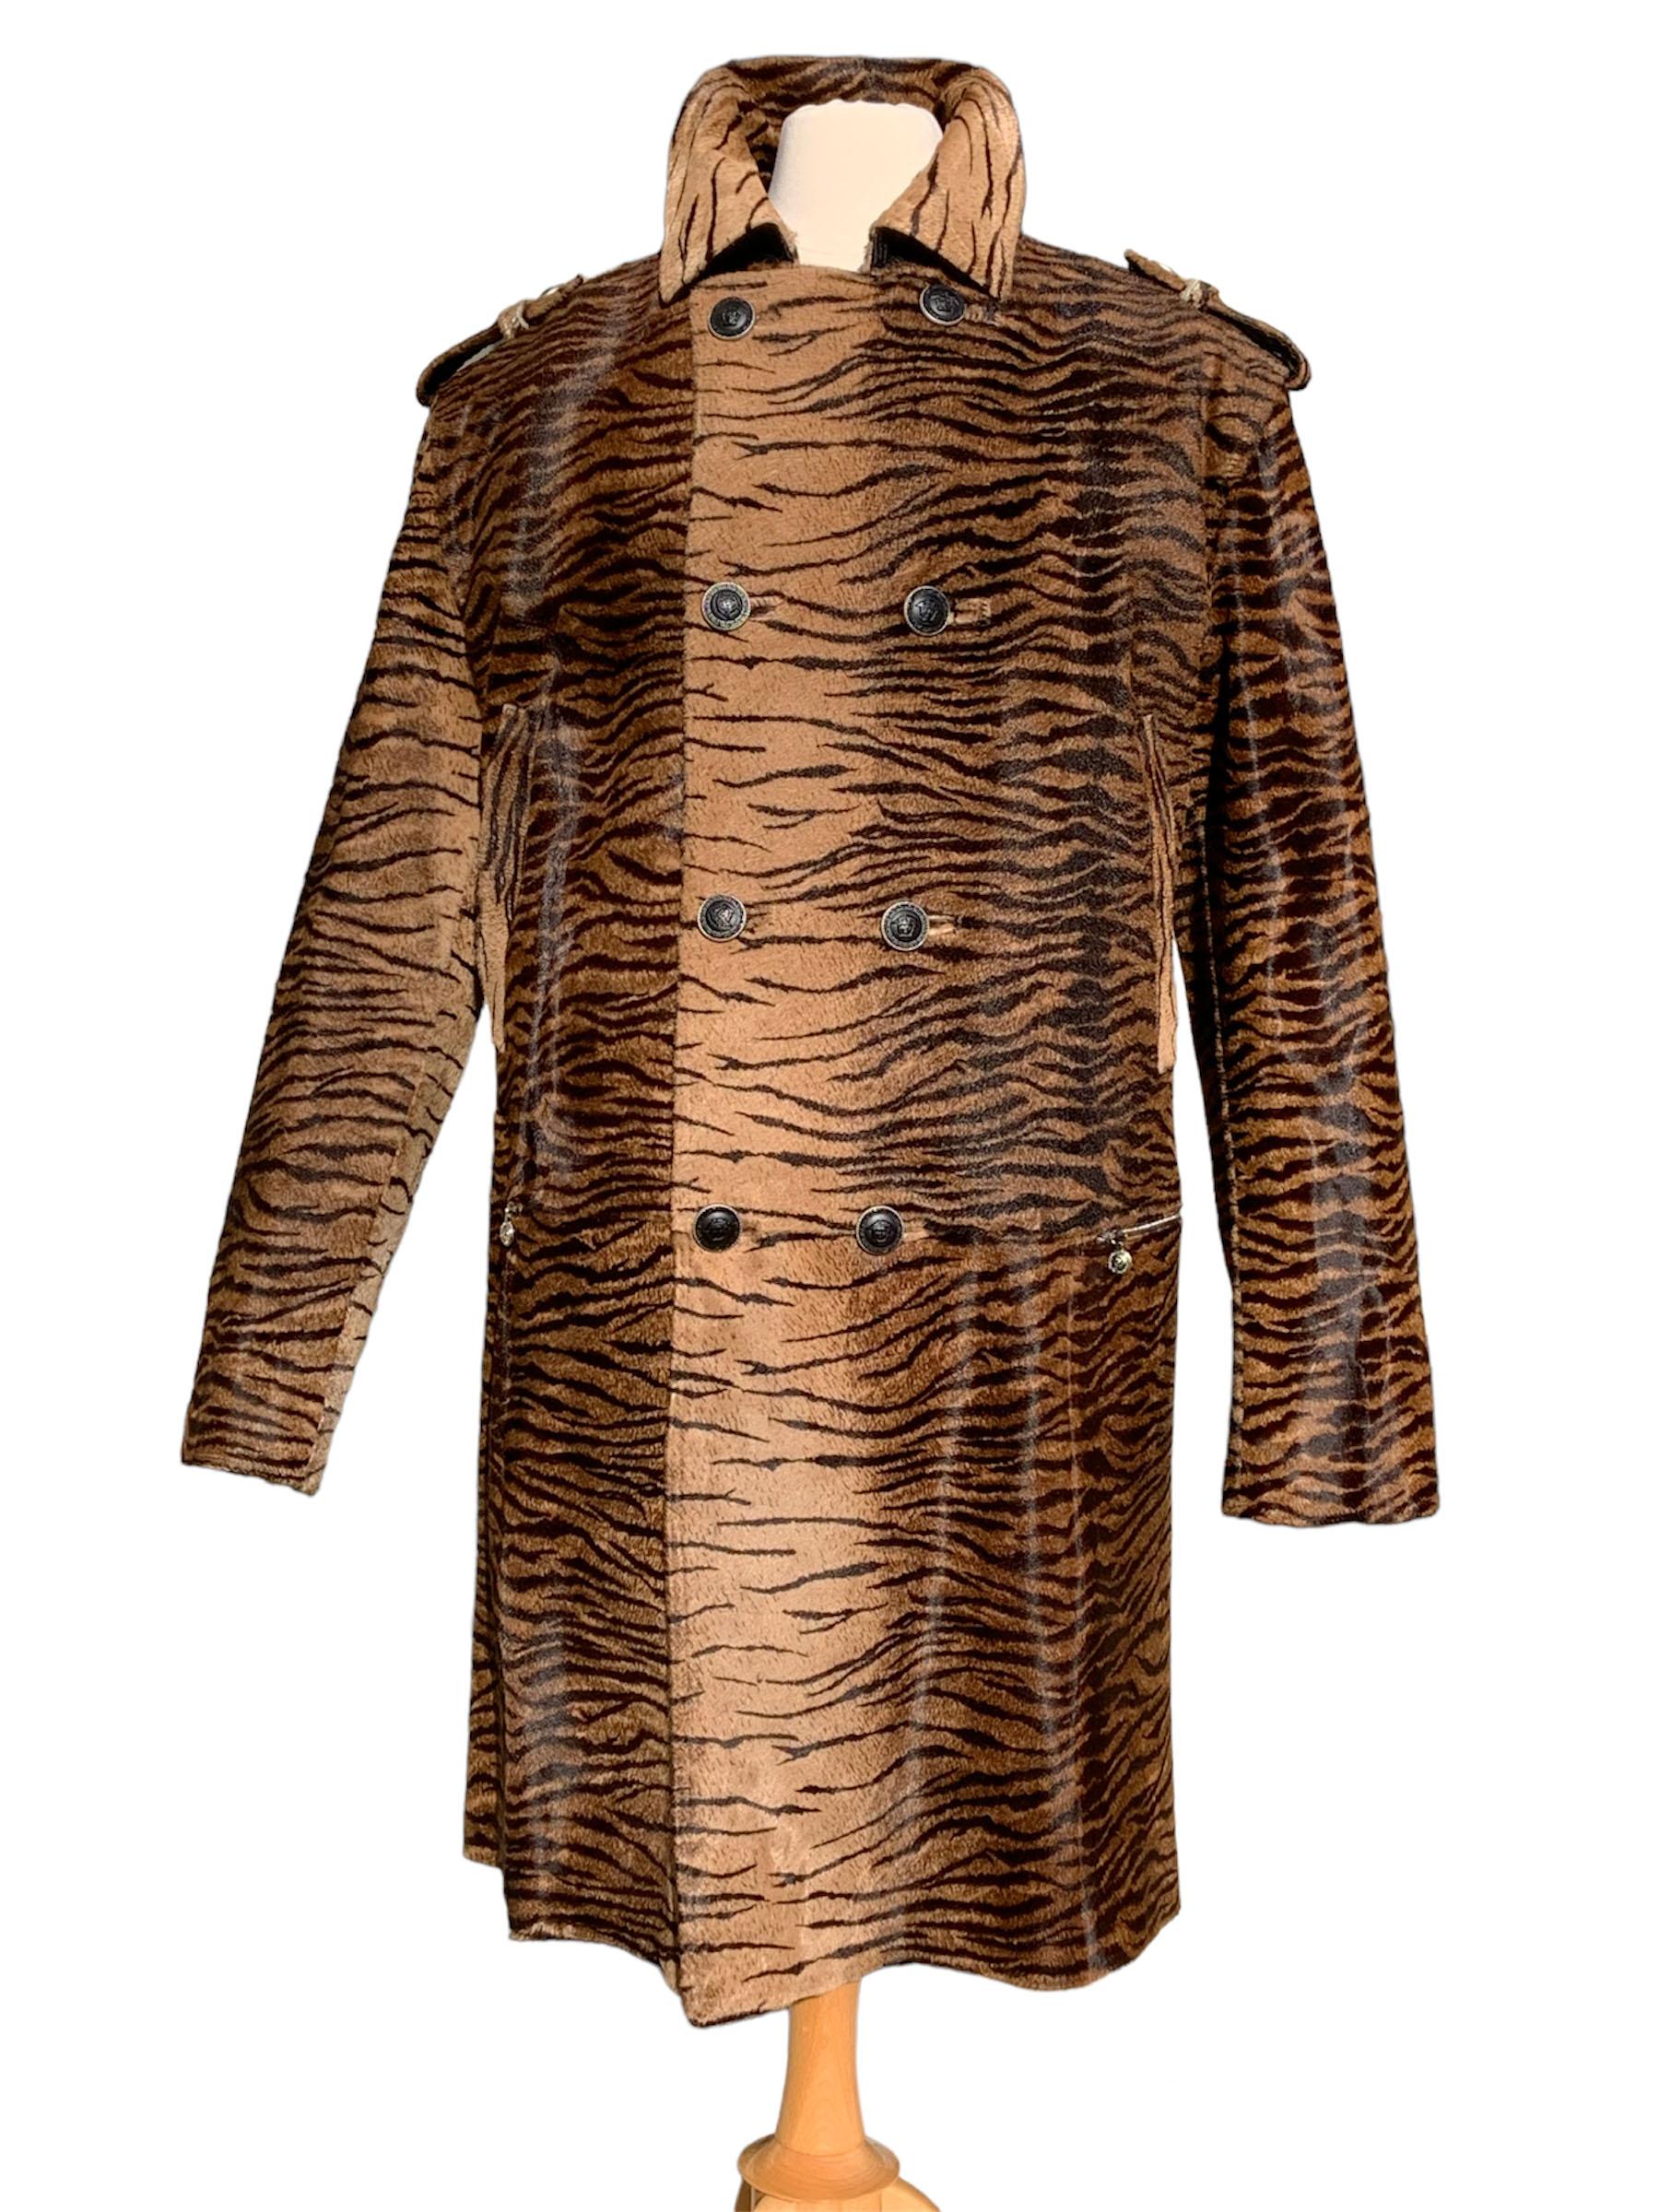 NWT Vintage Gianni Versace White Label Zebra Print Fur Leather Men's Coat
F/W 1999 Collection
Iconic Zebra Print Leather Pony Hair, Double Breasted, Four Pockets, Epaulets, Back Slit with Buttons, Zip Closure at Sleeves, Decorative Belt, All Buttons